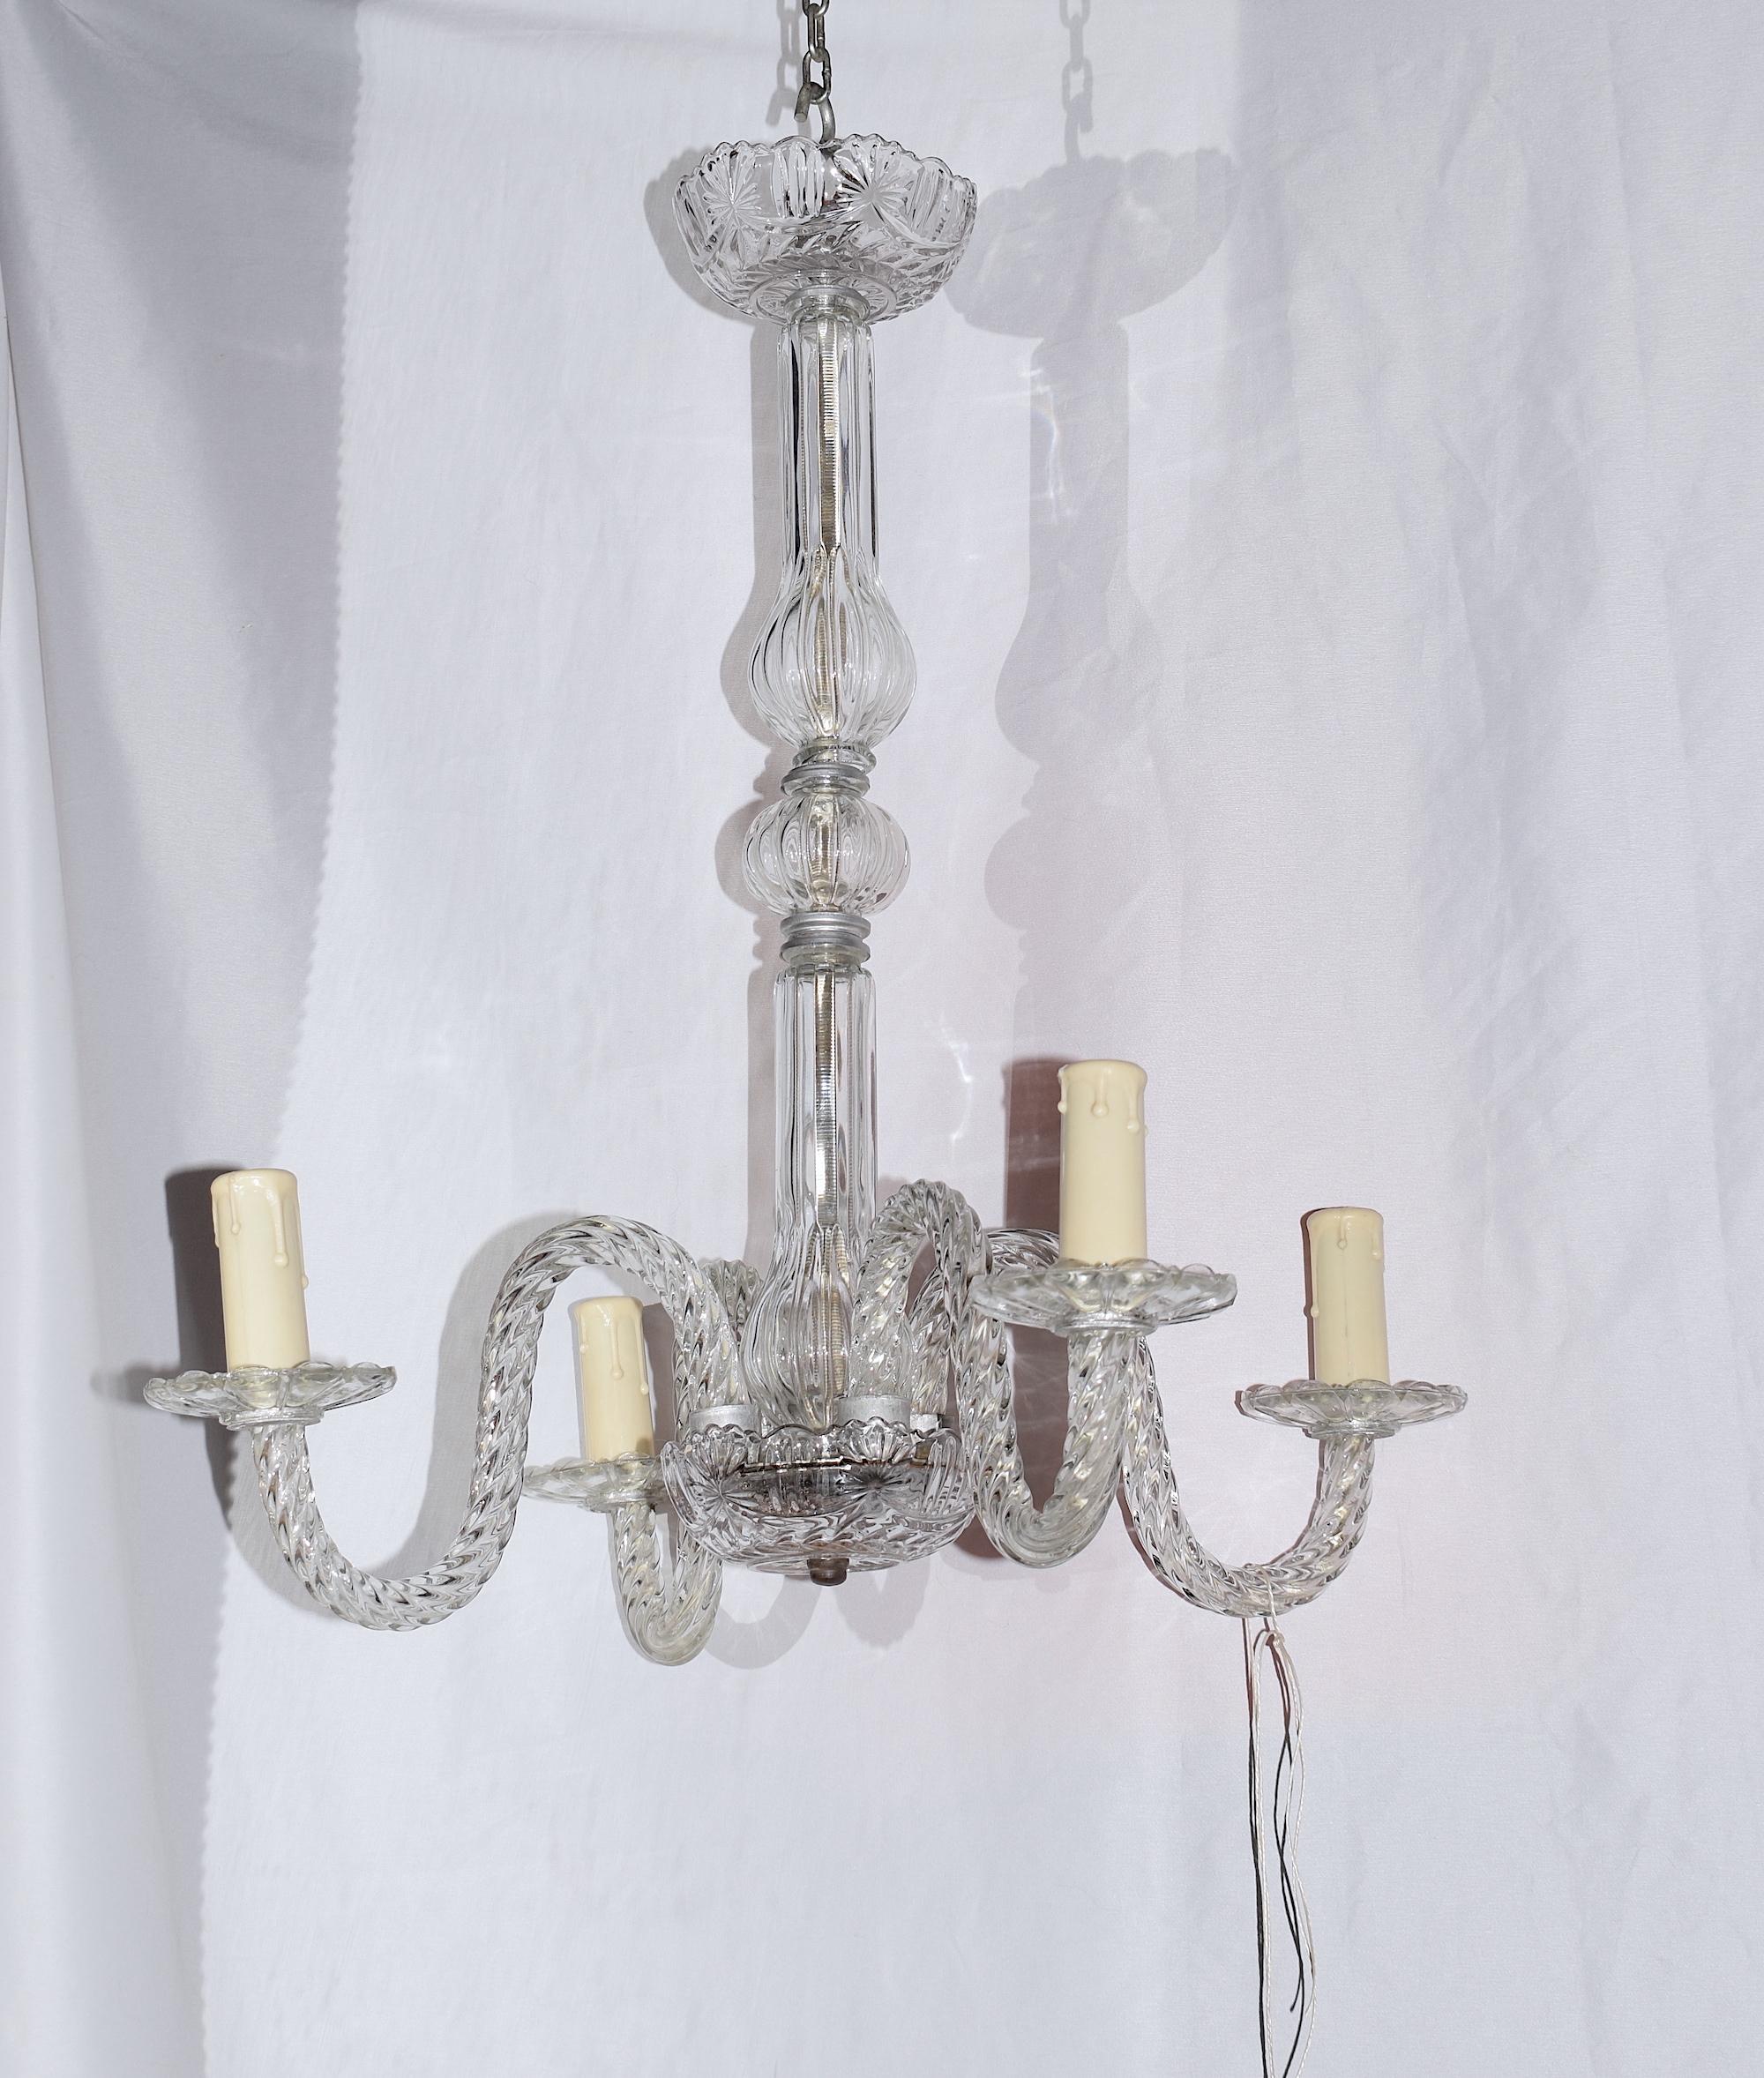 A small but grand early 20th century glass chandelier. This chandelier is elegant and radiated the style of Murano Ressonico chandeliers that are made in Venice. It has four twisted glass arms that connect to electric light bulbs. All original parts